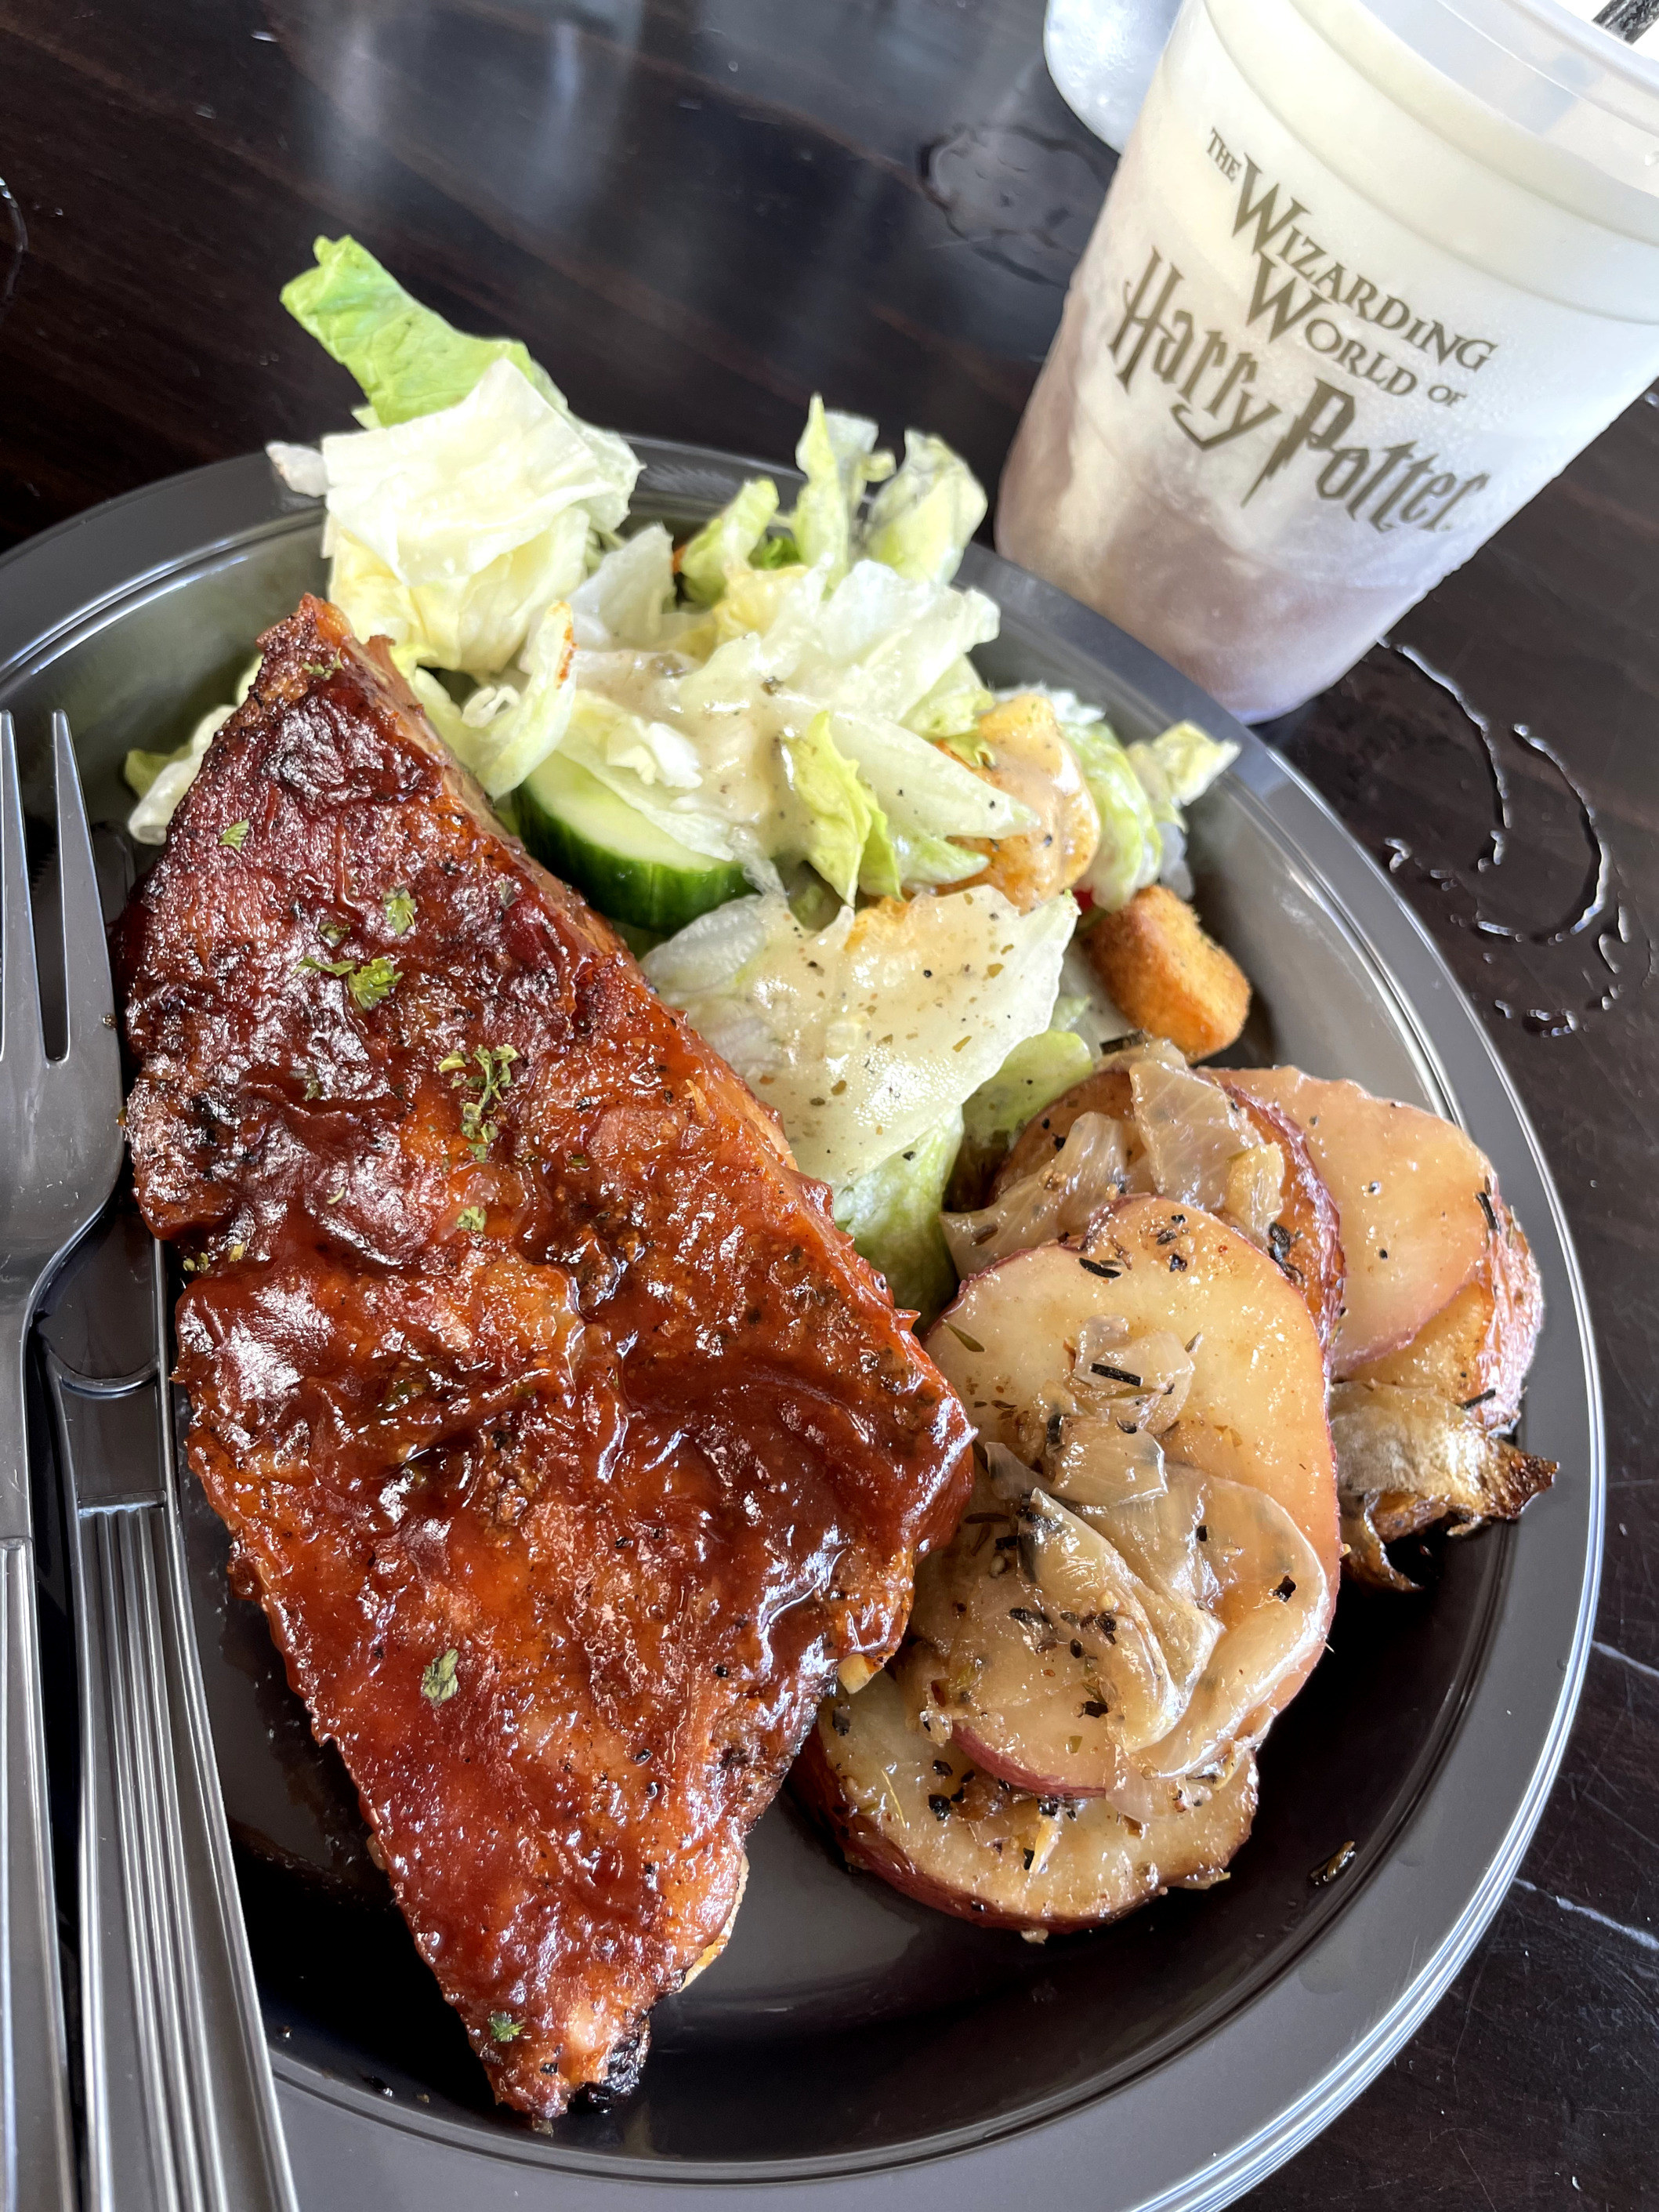 A photo of BBQ ribs, potatoes and salad on a plate with a drink on the side